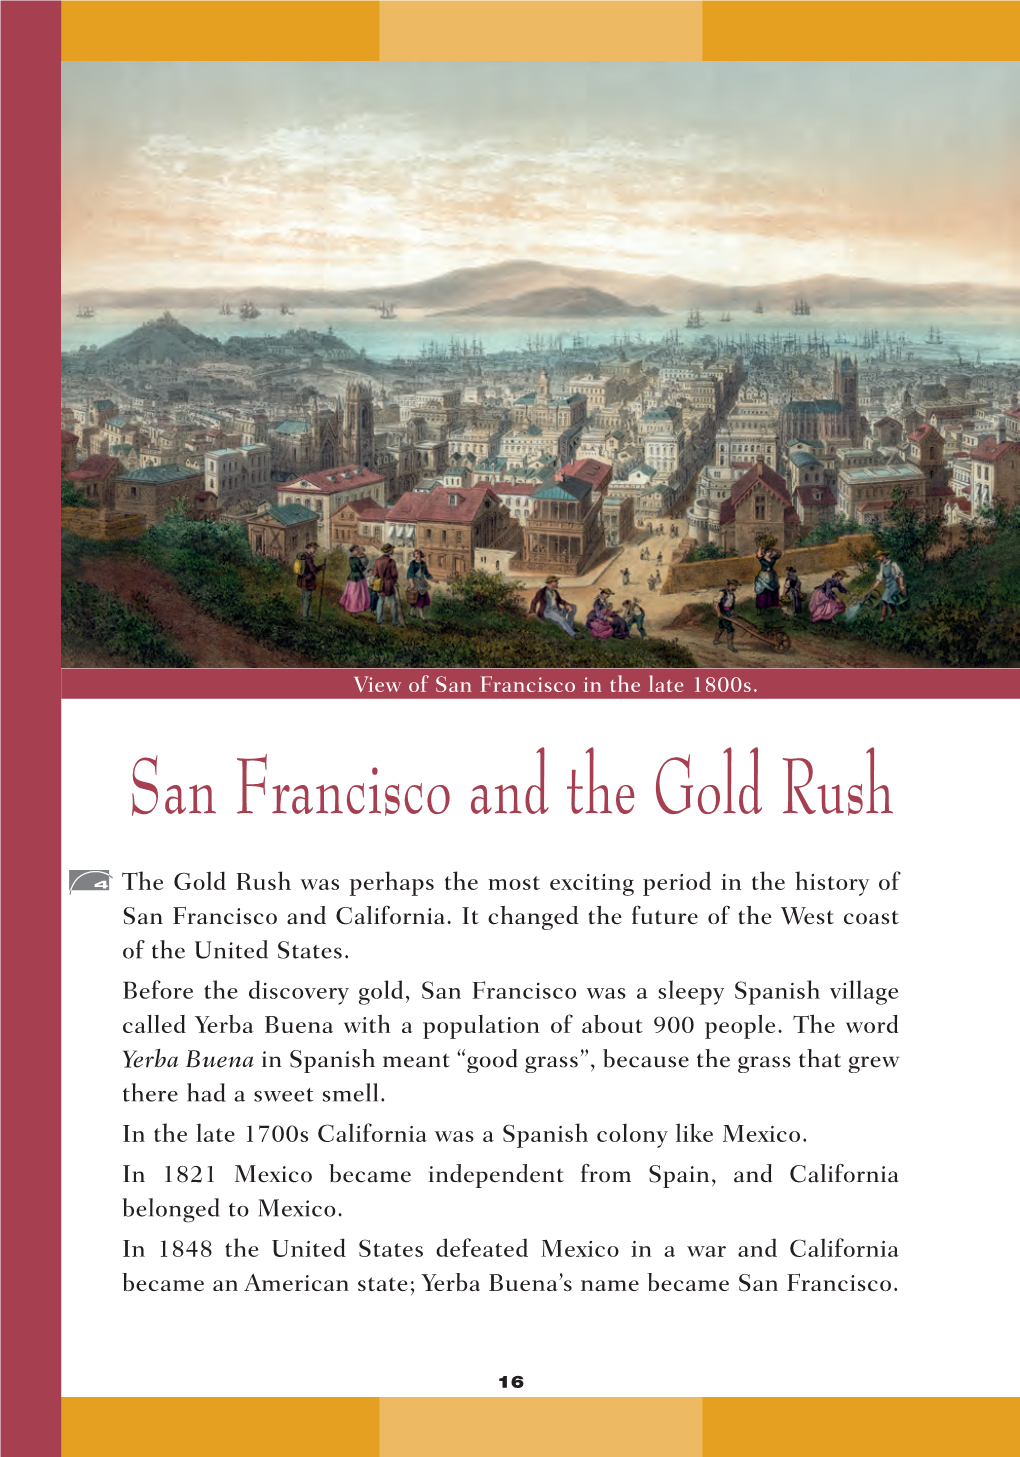 San Francisco and the Gold Rush